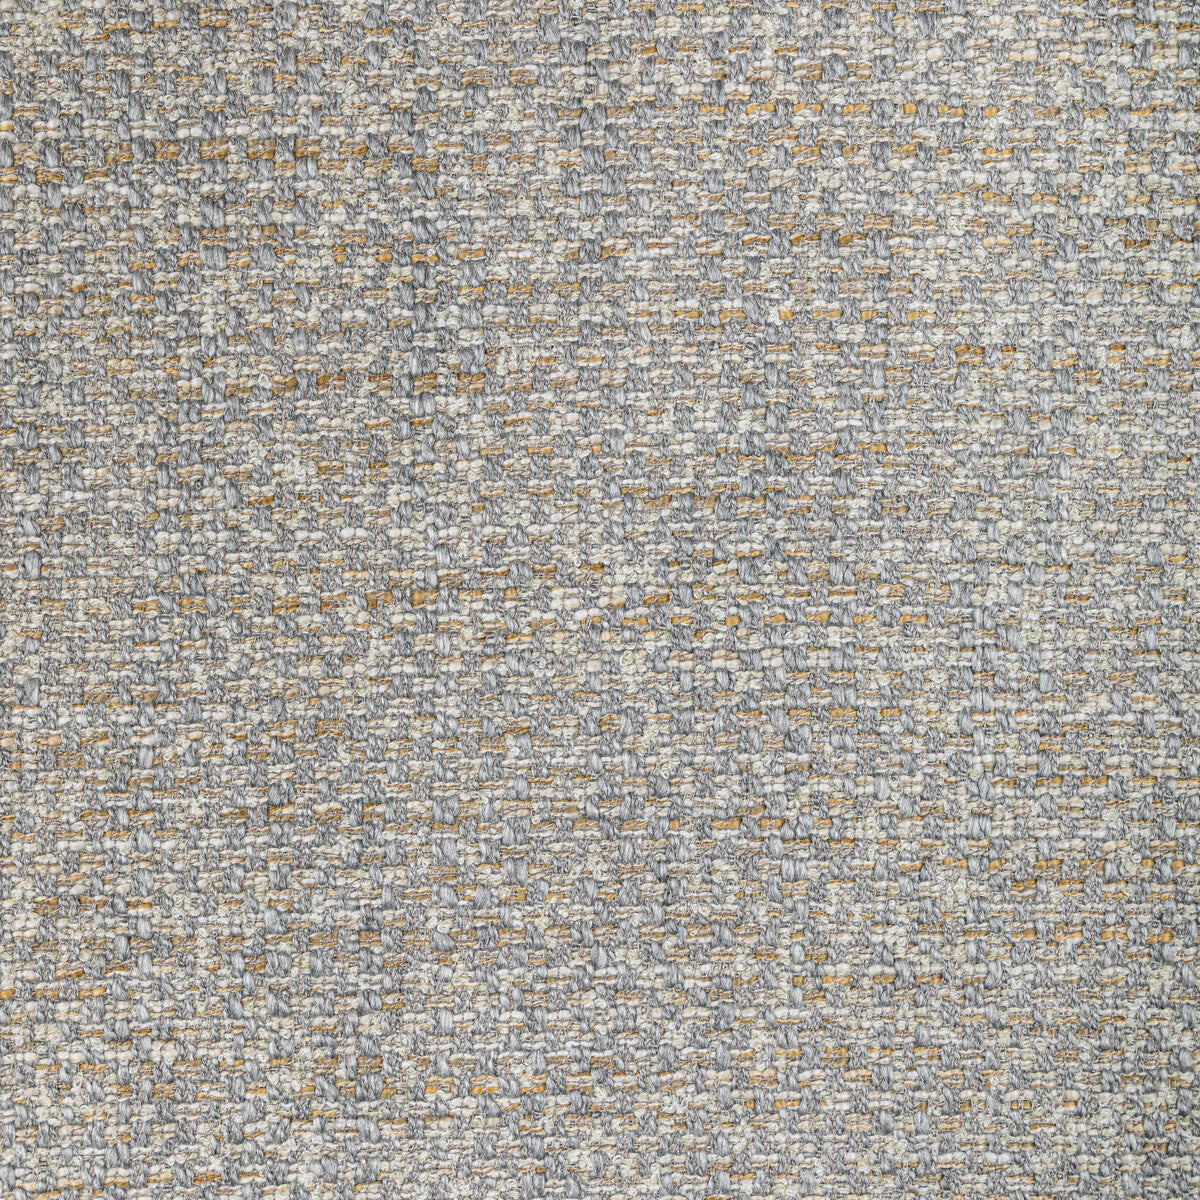 Dax fabric in sterling color - pattern 36326.1101.0 - by Kravet Contract